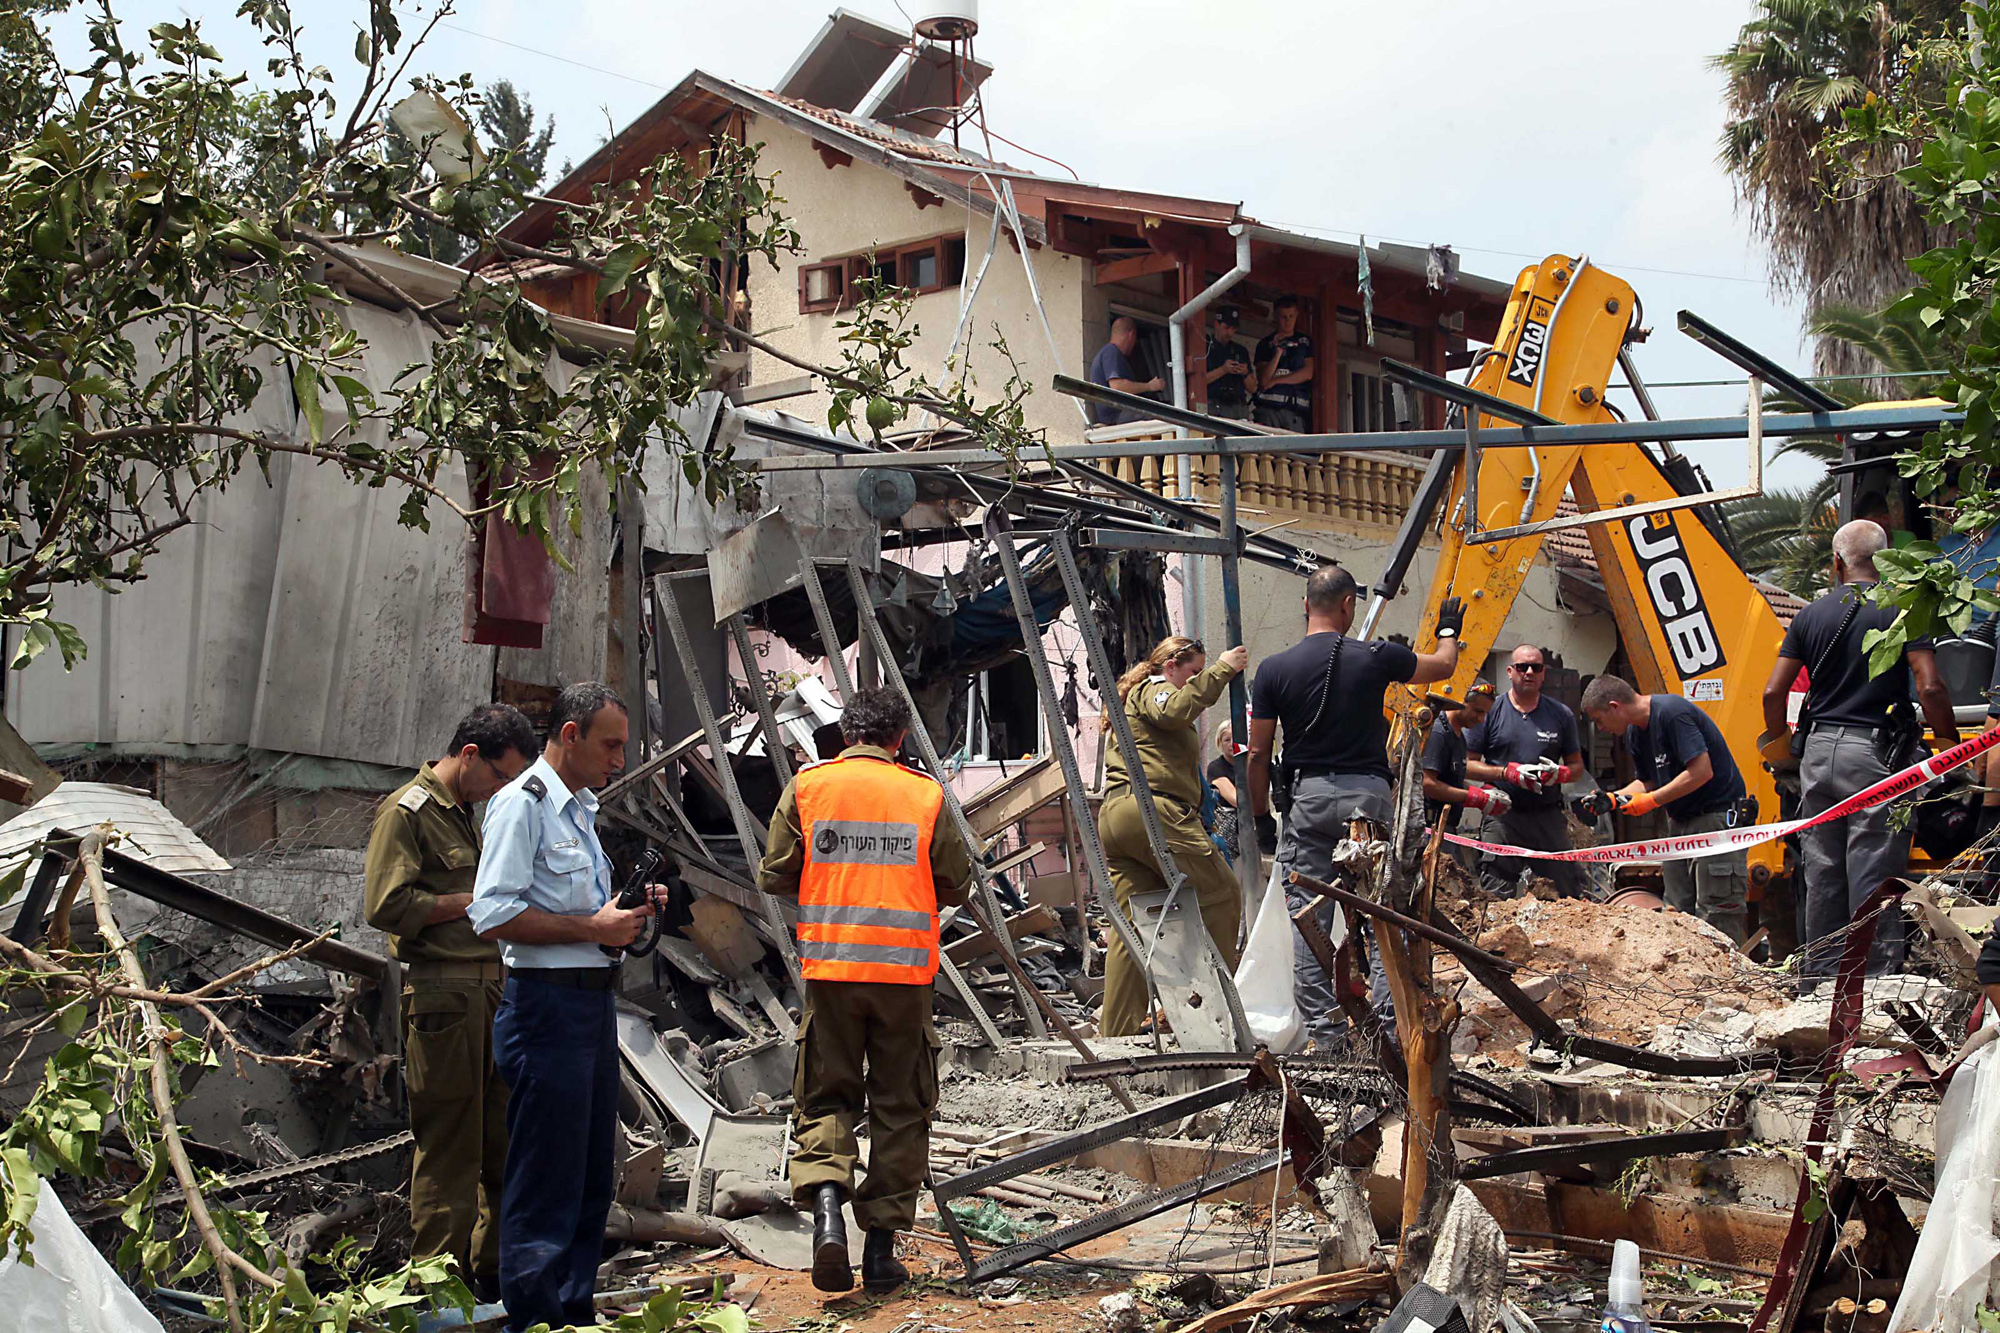 Israeli rescue and military personnel at the wreckage of a home in the town of Yehud, outside Tel Aviv, and near the Ben Gurion Airport, that was hit by a missile fired by Palestinian militants from inside the Gaza Strip, July 22, 2014. (Gideon Markowicz—EPA)